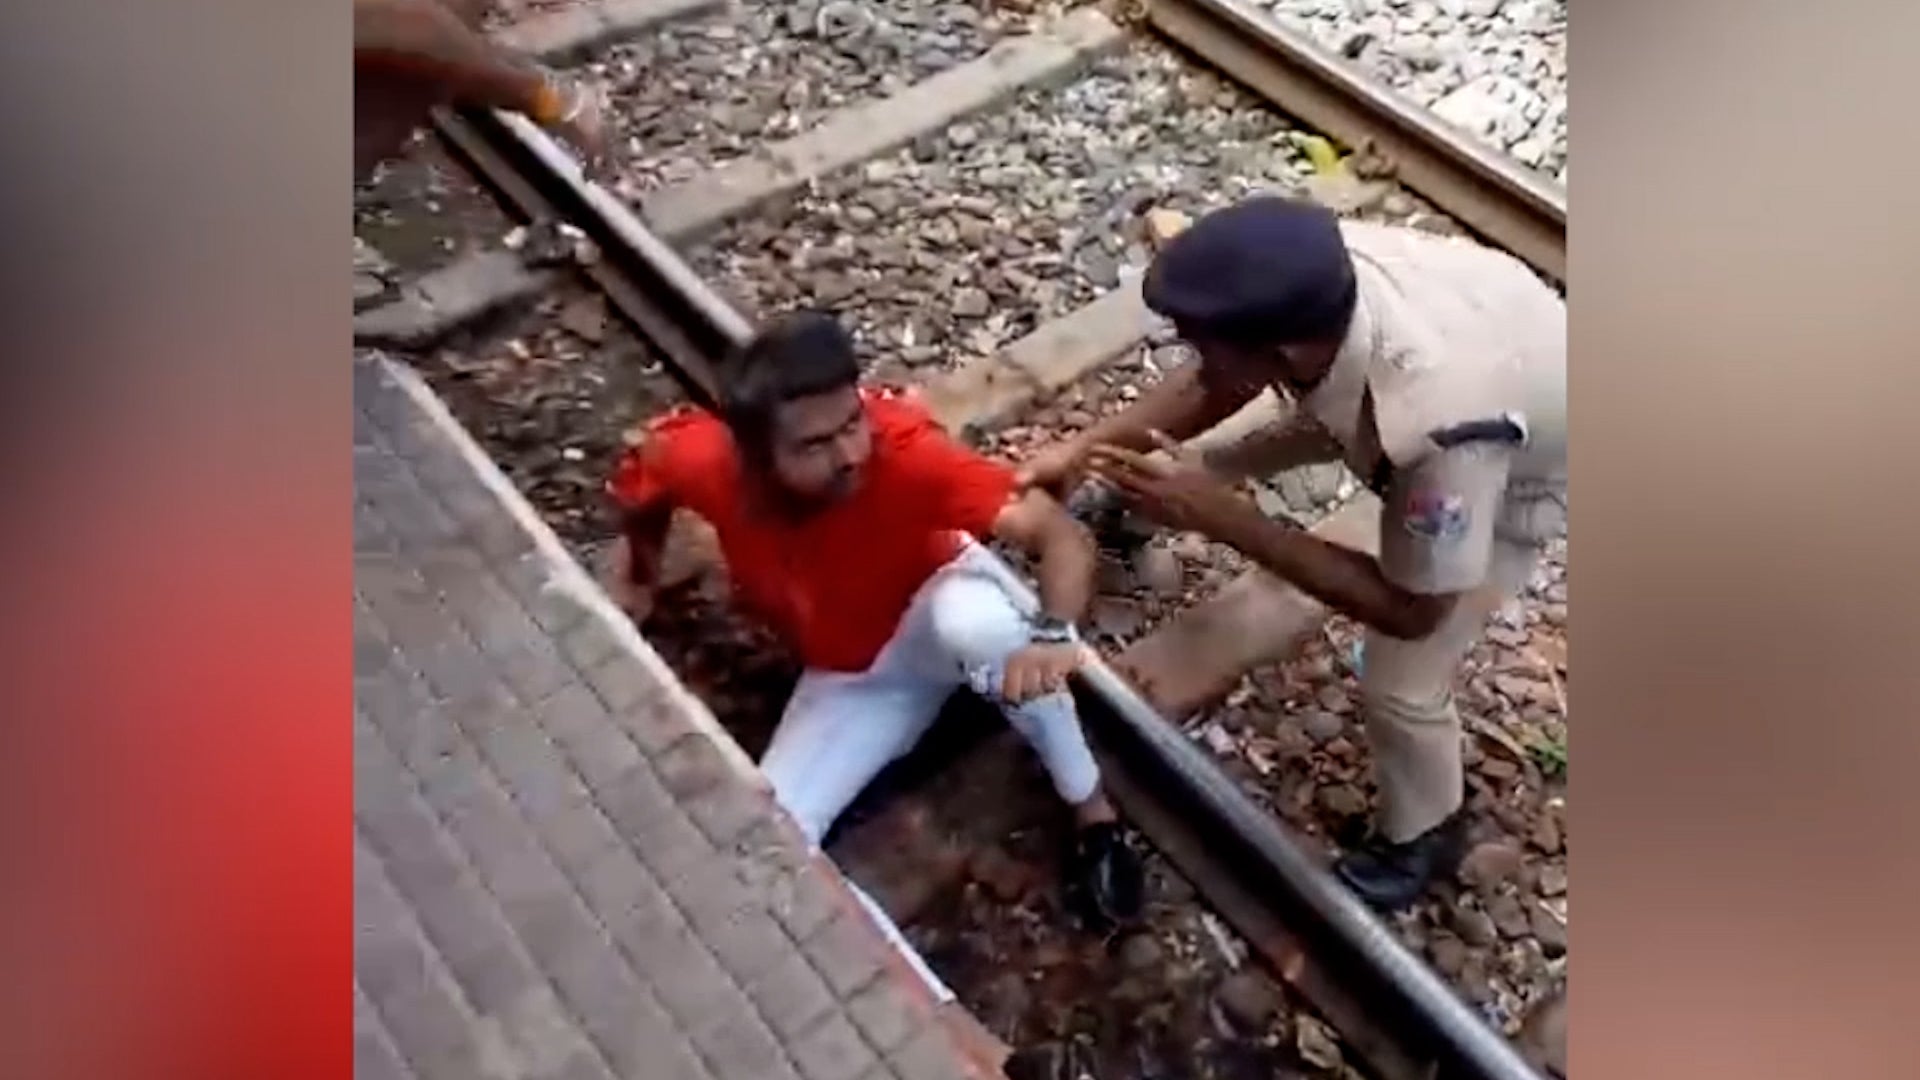 The man is helped up after surviving falling under a moving train in India